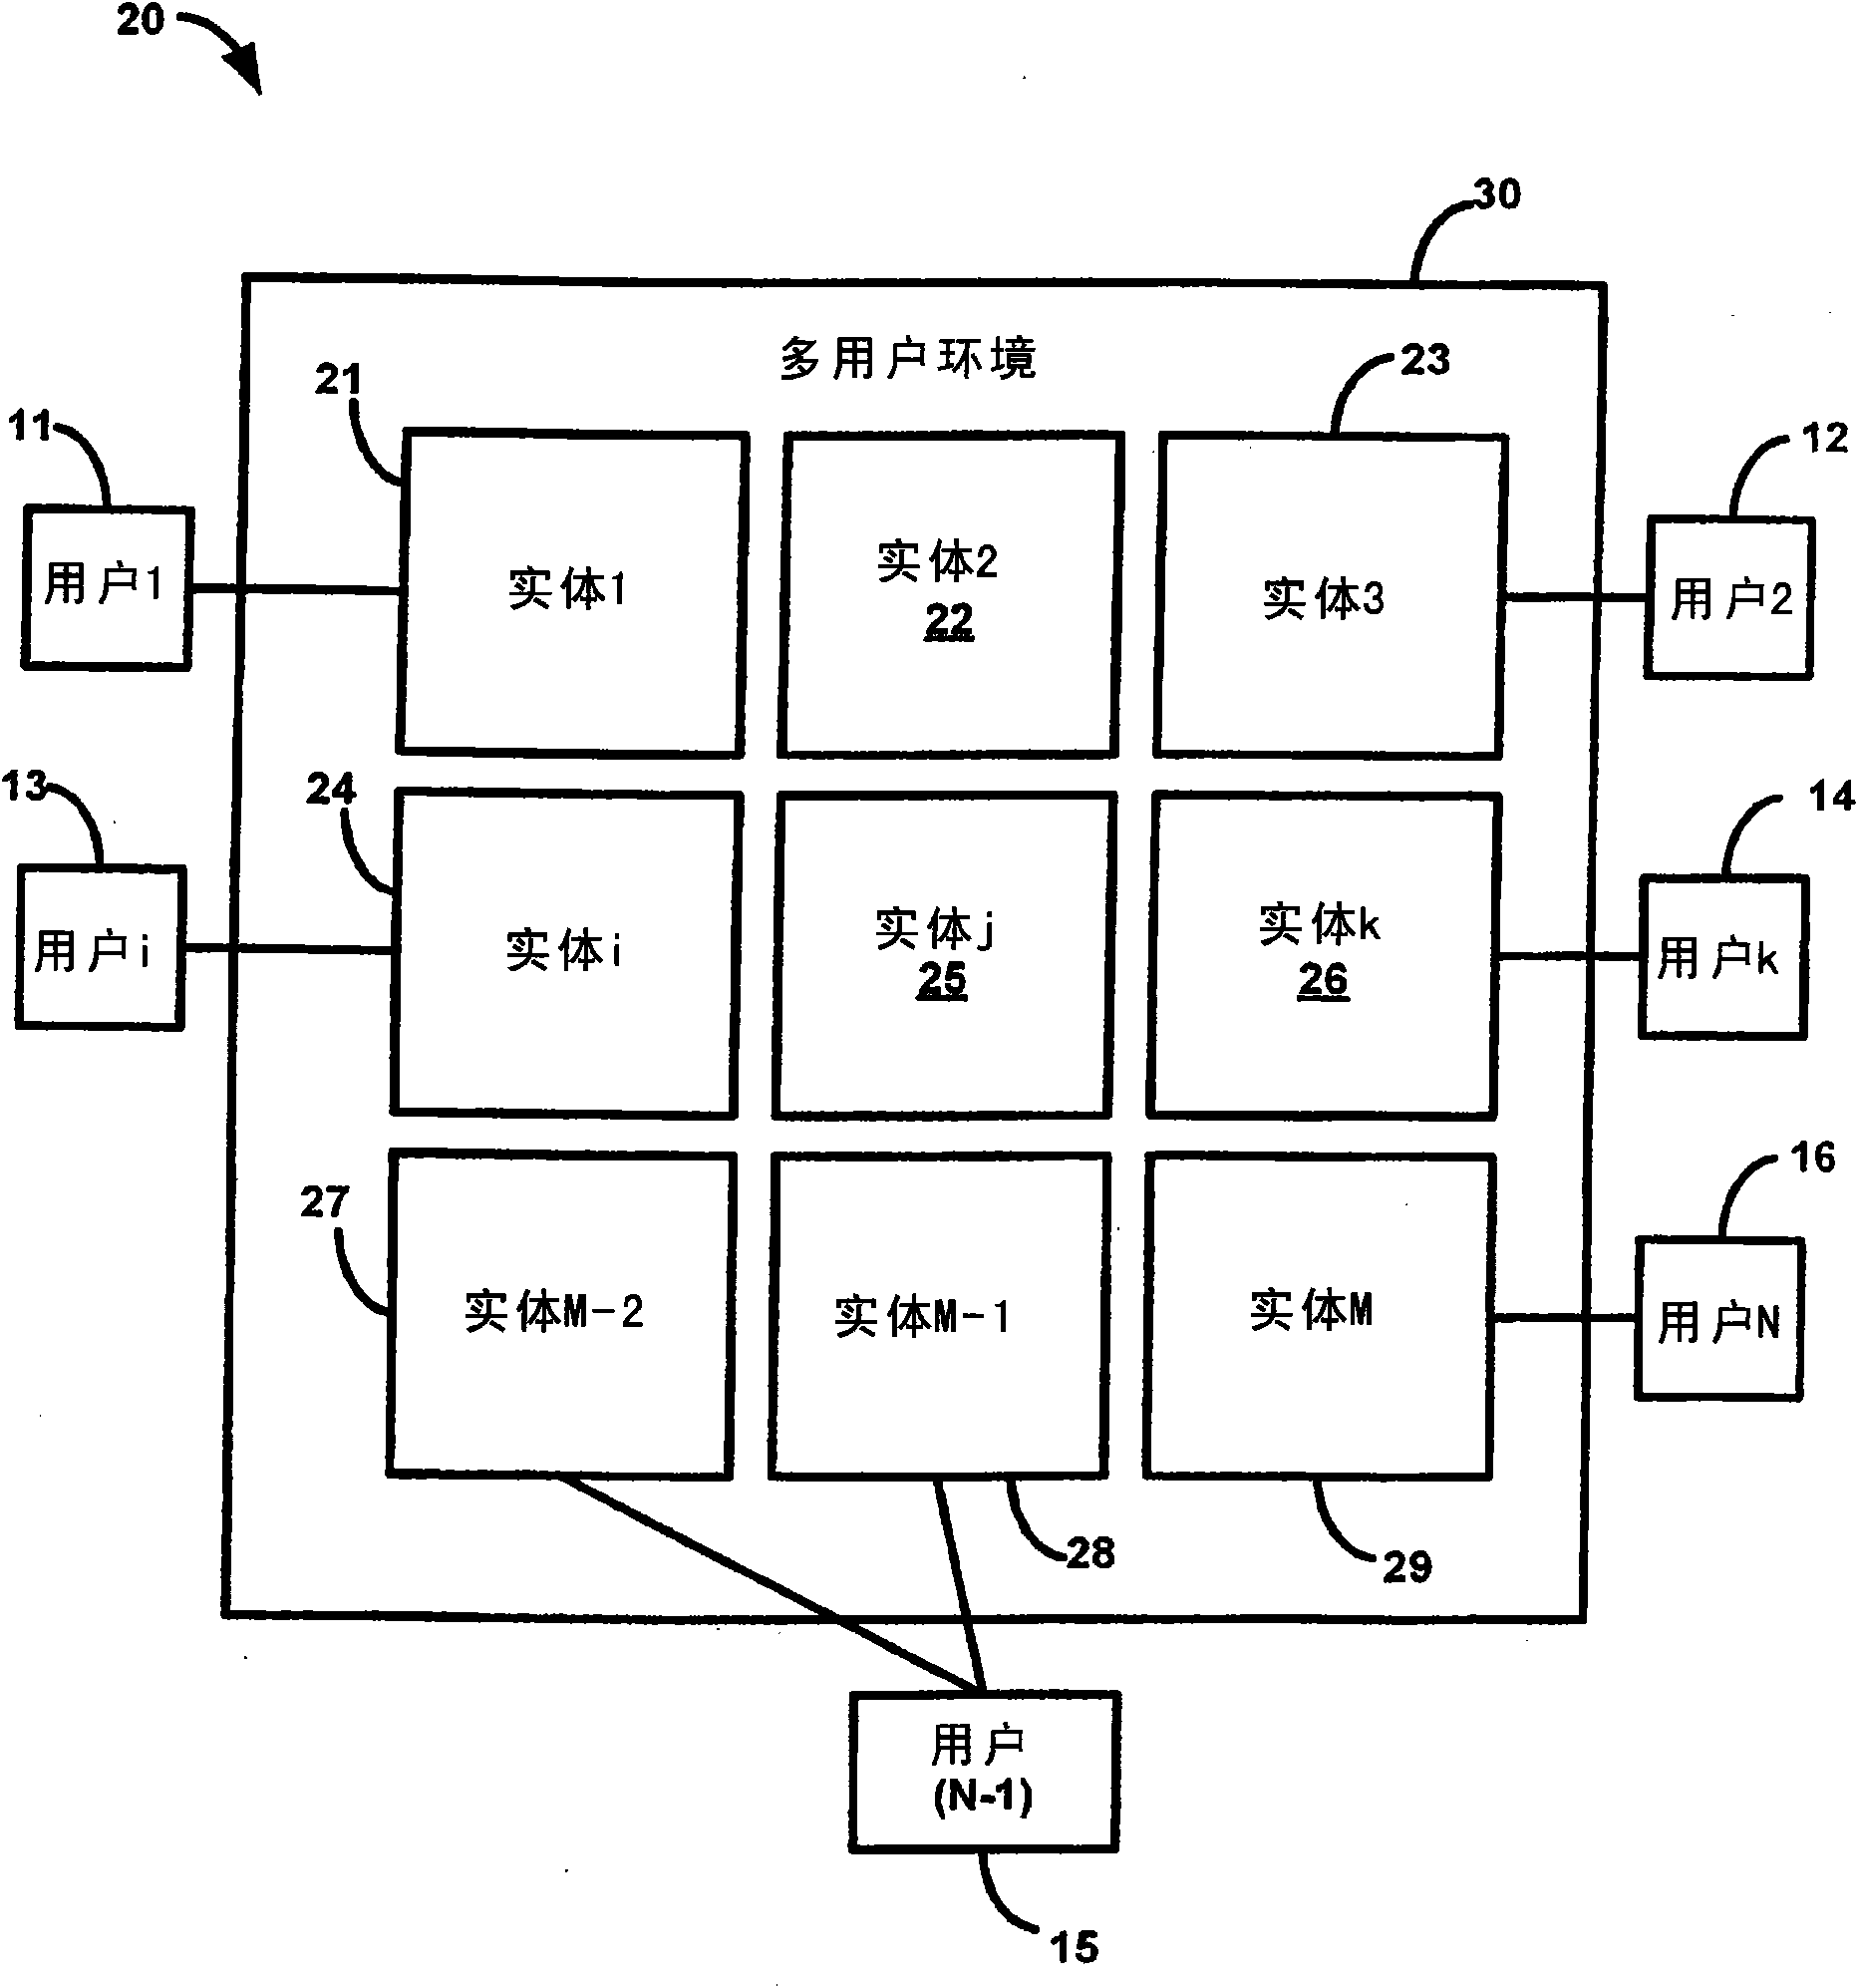 System and method for creating, editing, and sharing video content relating to video game events